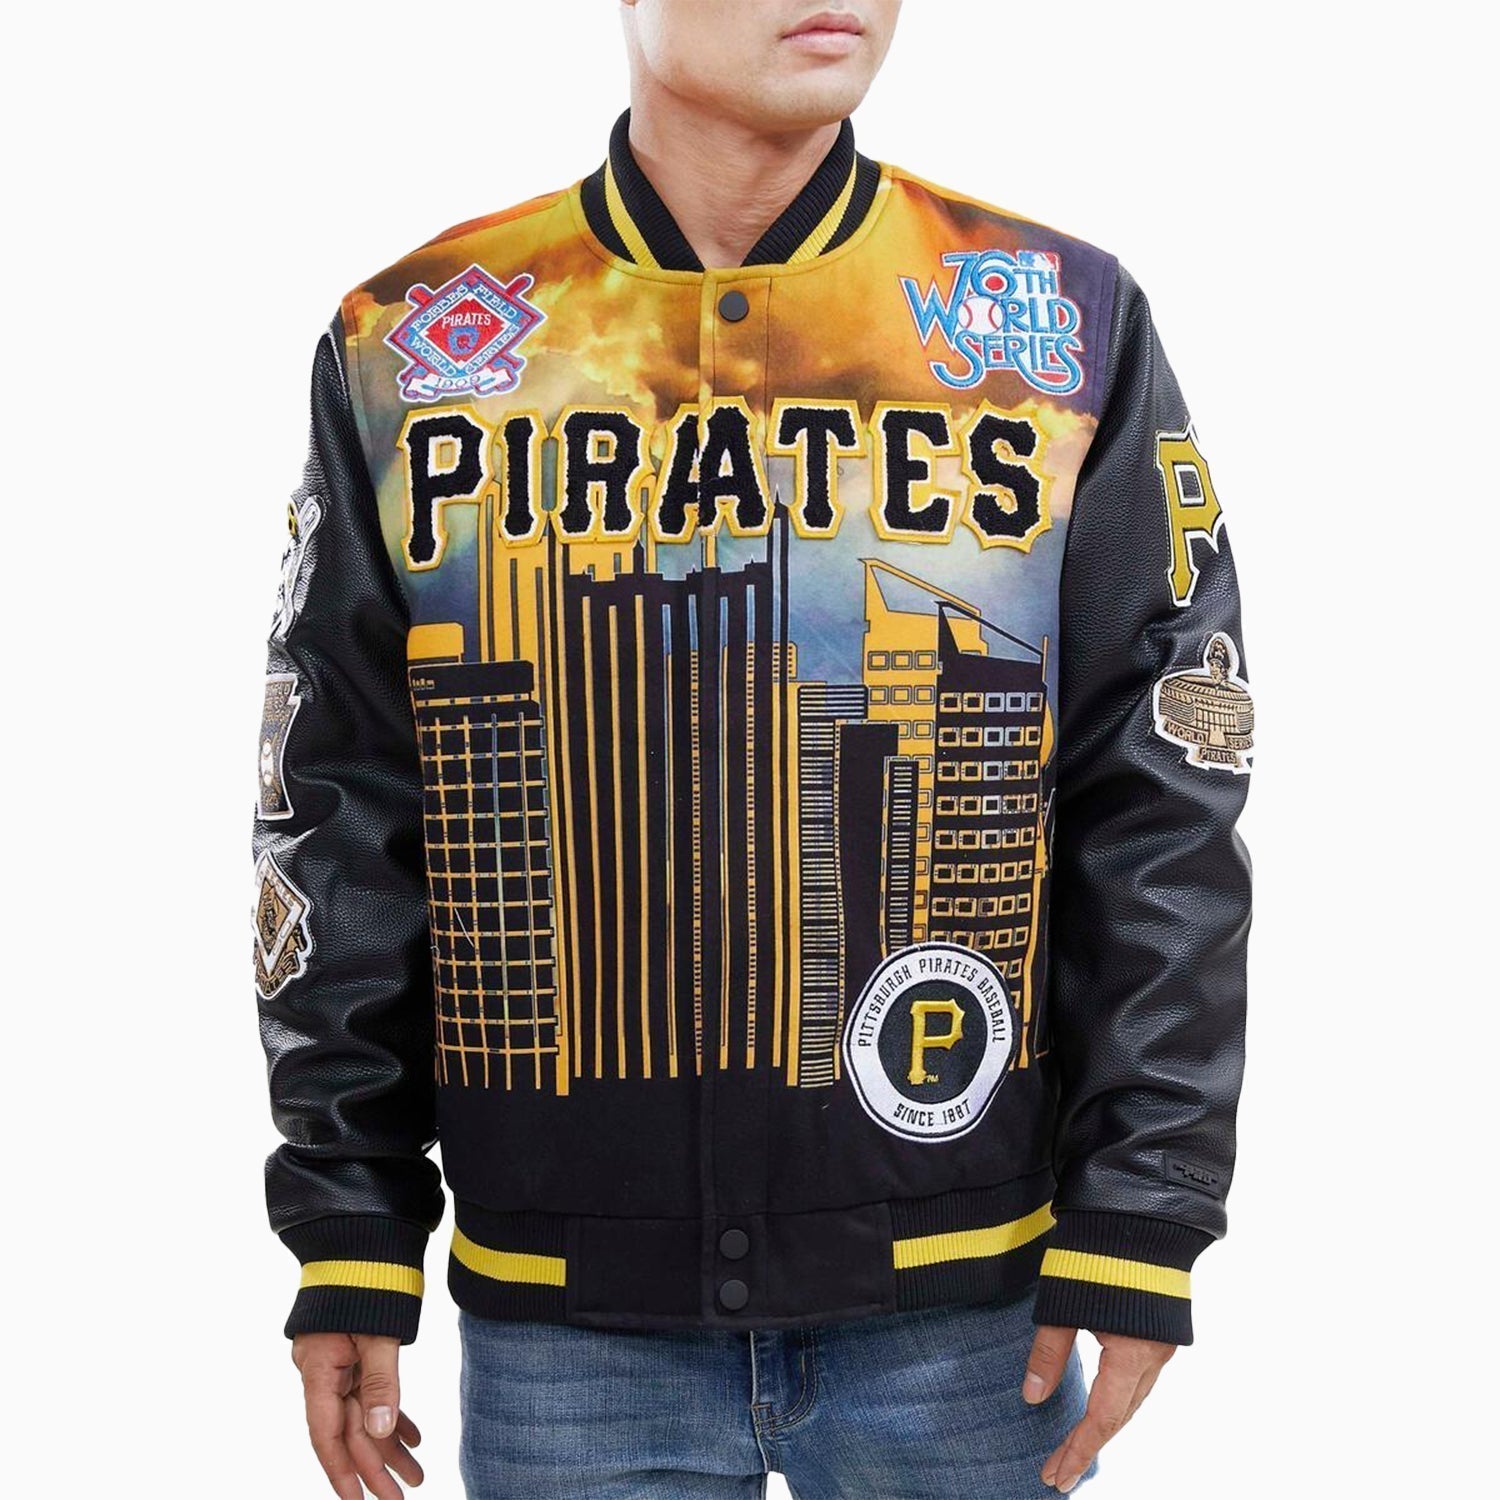 Pro Standard Men's Pittsburgh Pirates Remix Varsity Jacket - Color: Black Yellow - Tops and Bottoms USA -